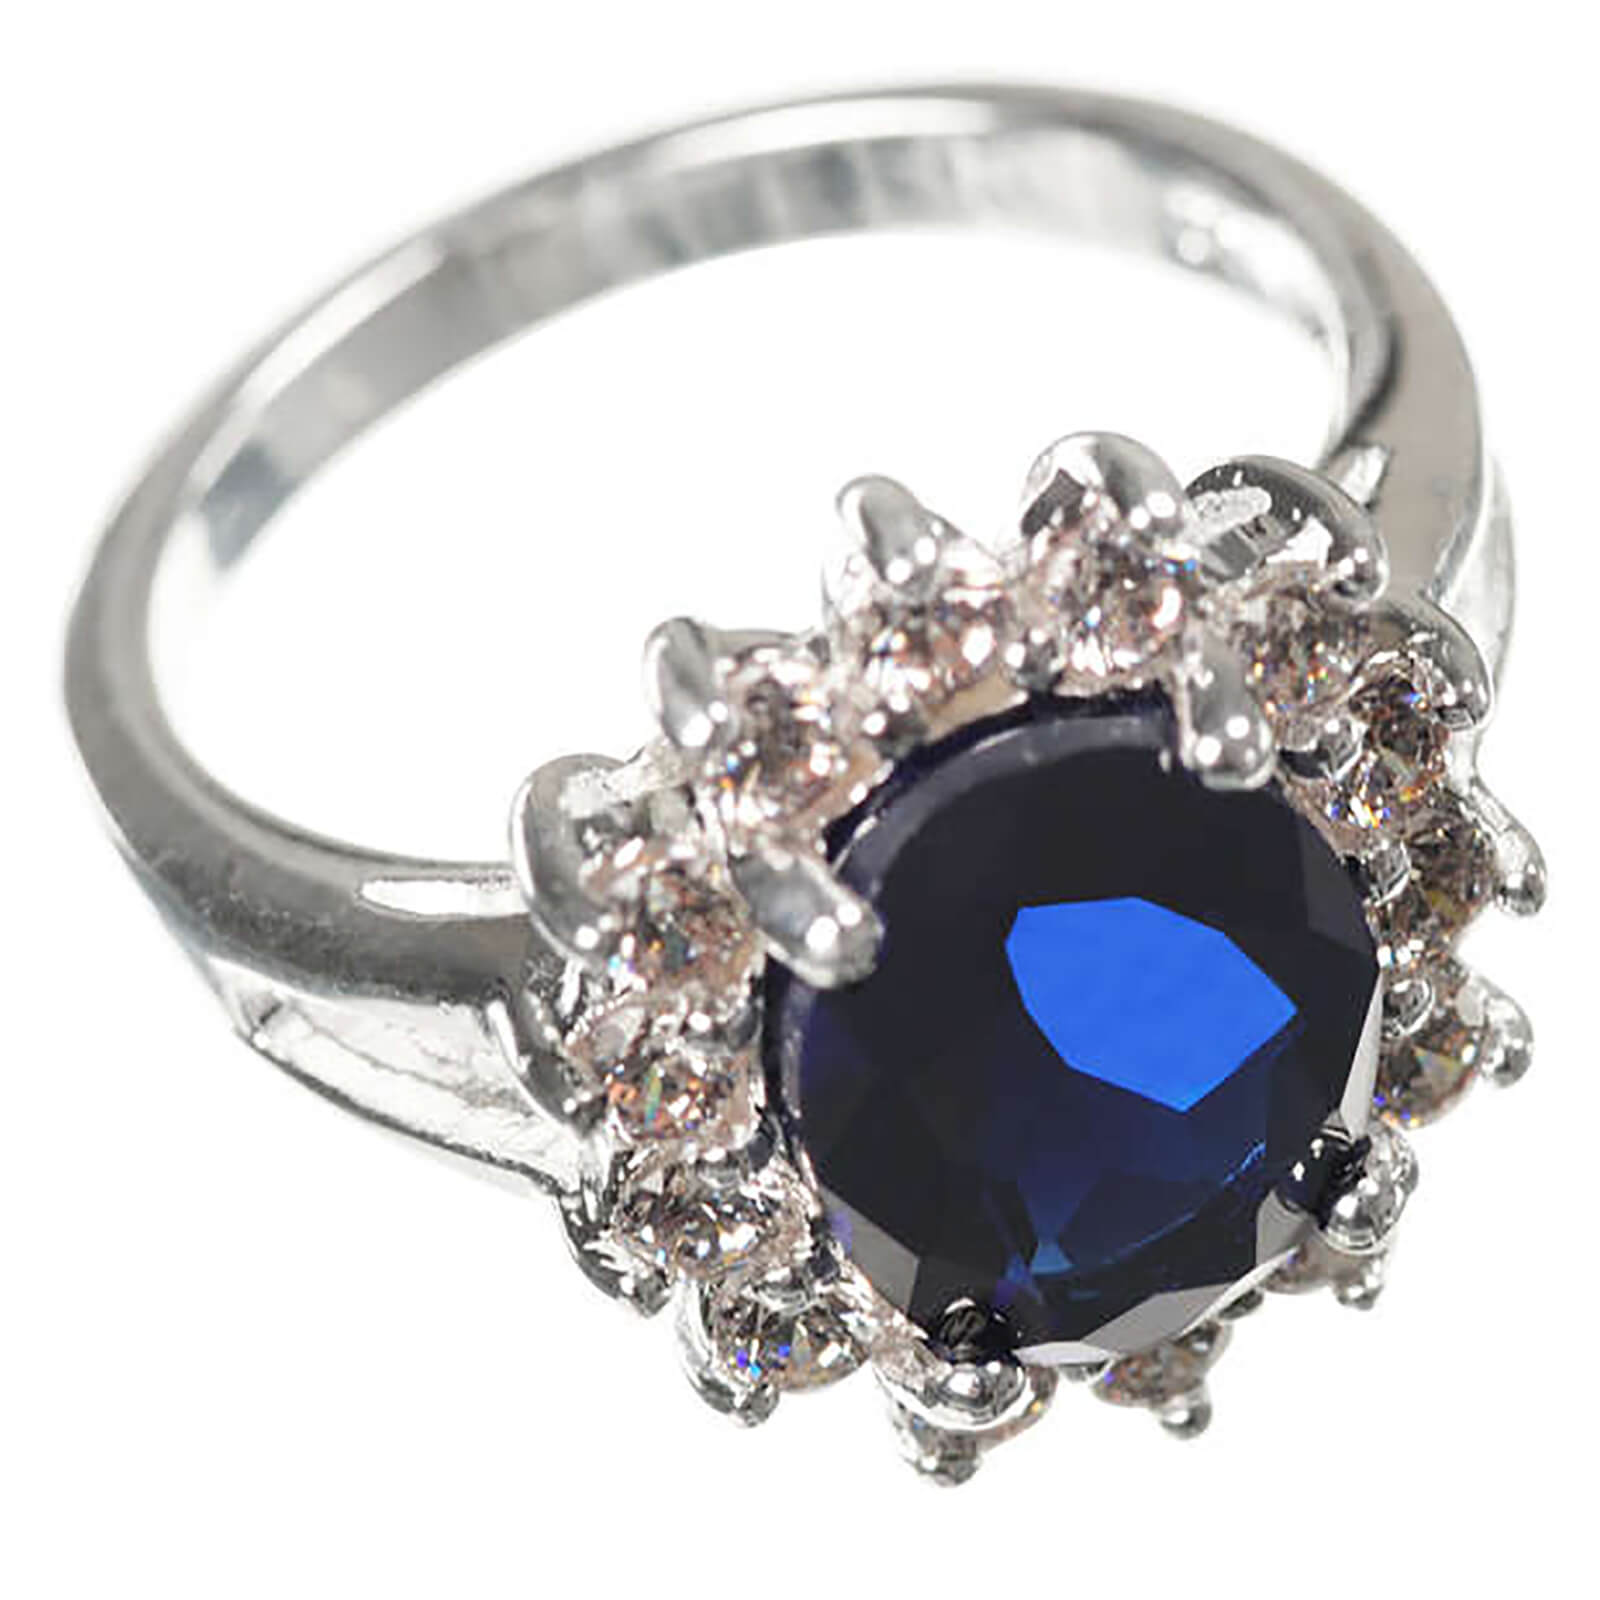 Silver Plated Ring with Blue Sapphire Stone Effect Centre  - in the style of Kate Middleton - N